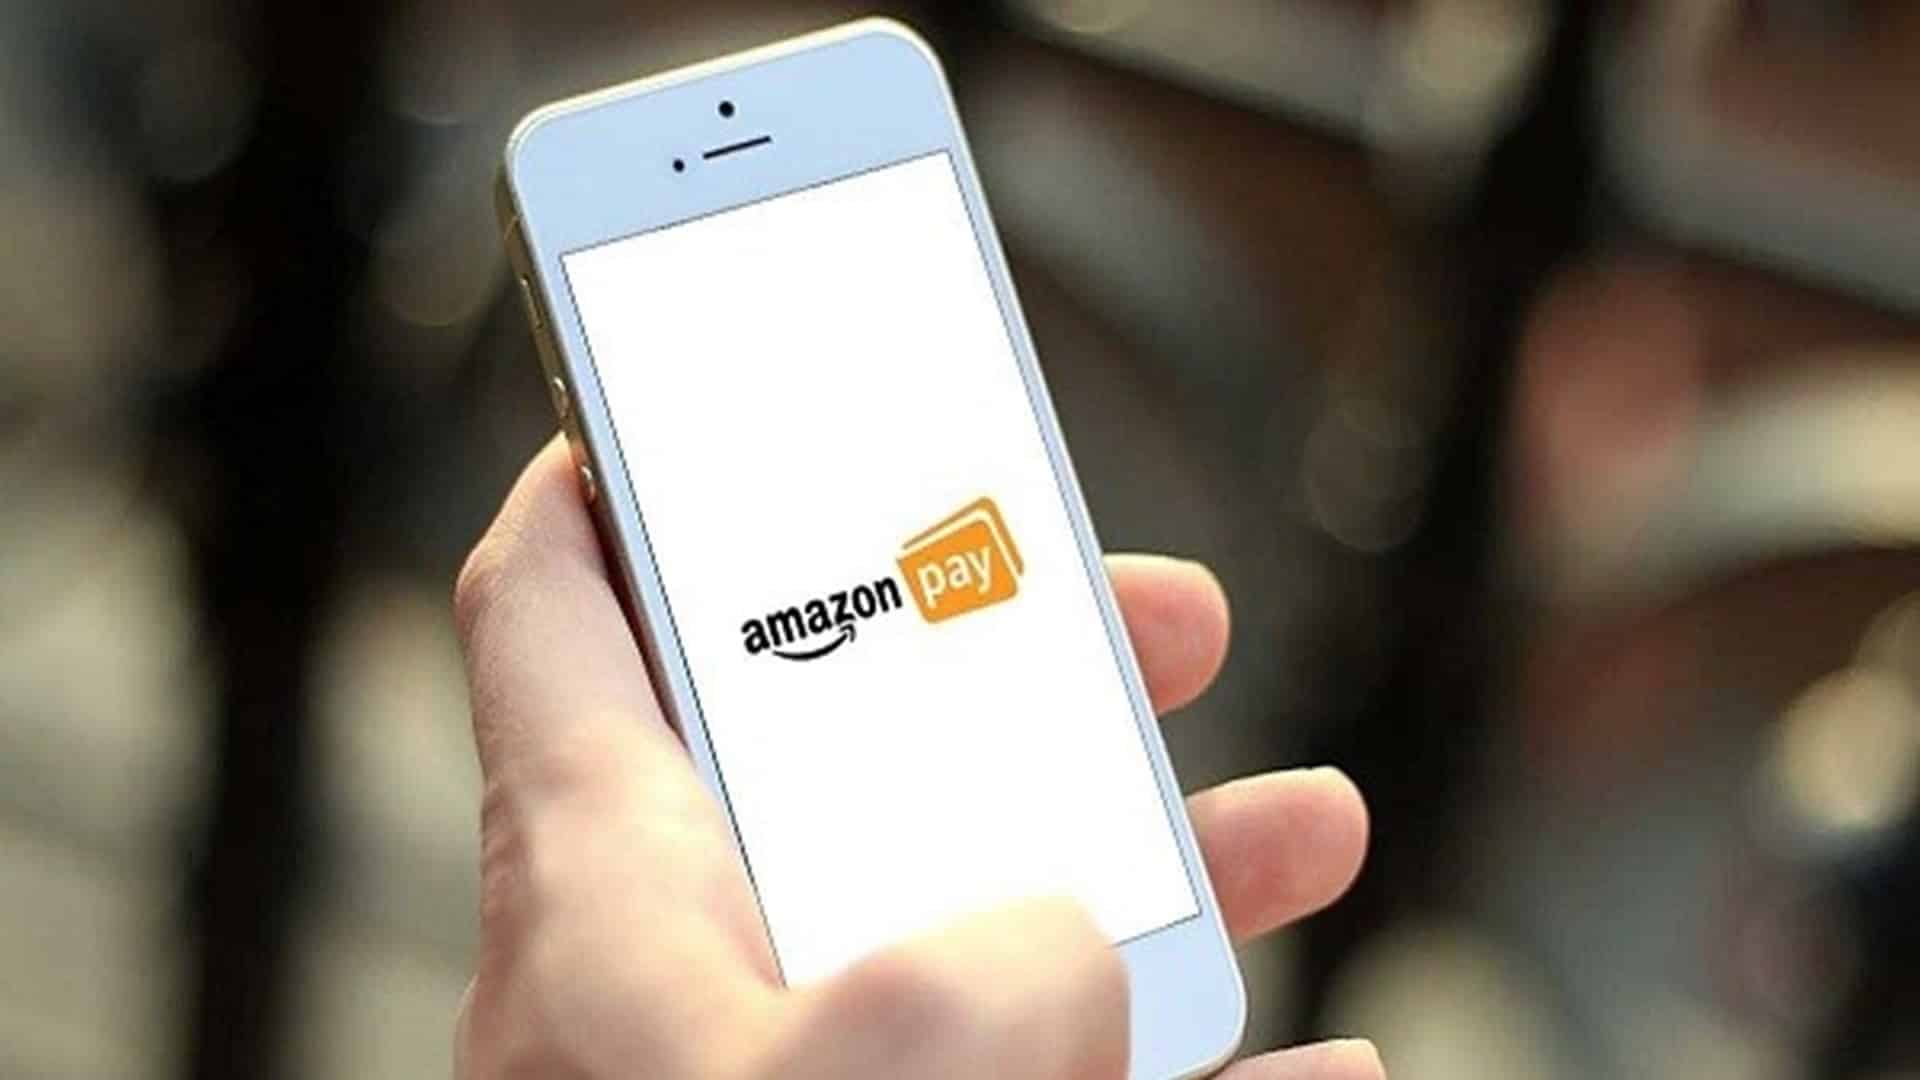 Amazon Pay Later clocks 2 million customers in just over a year after launch